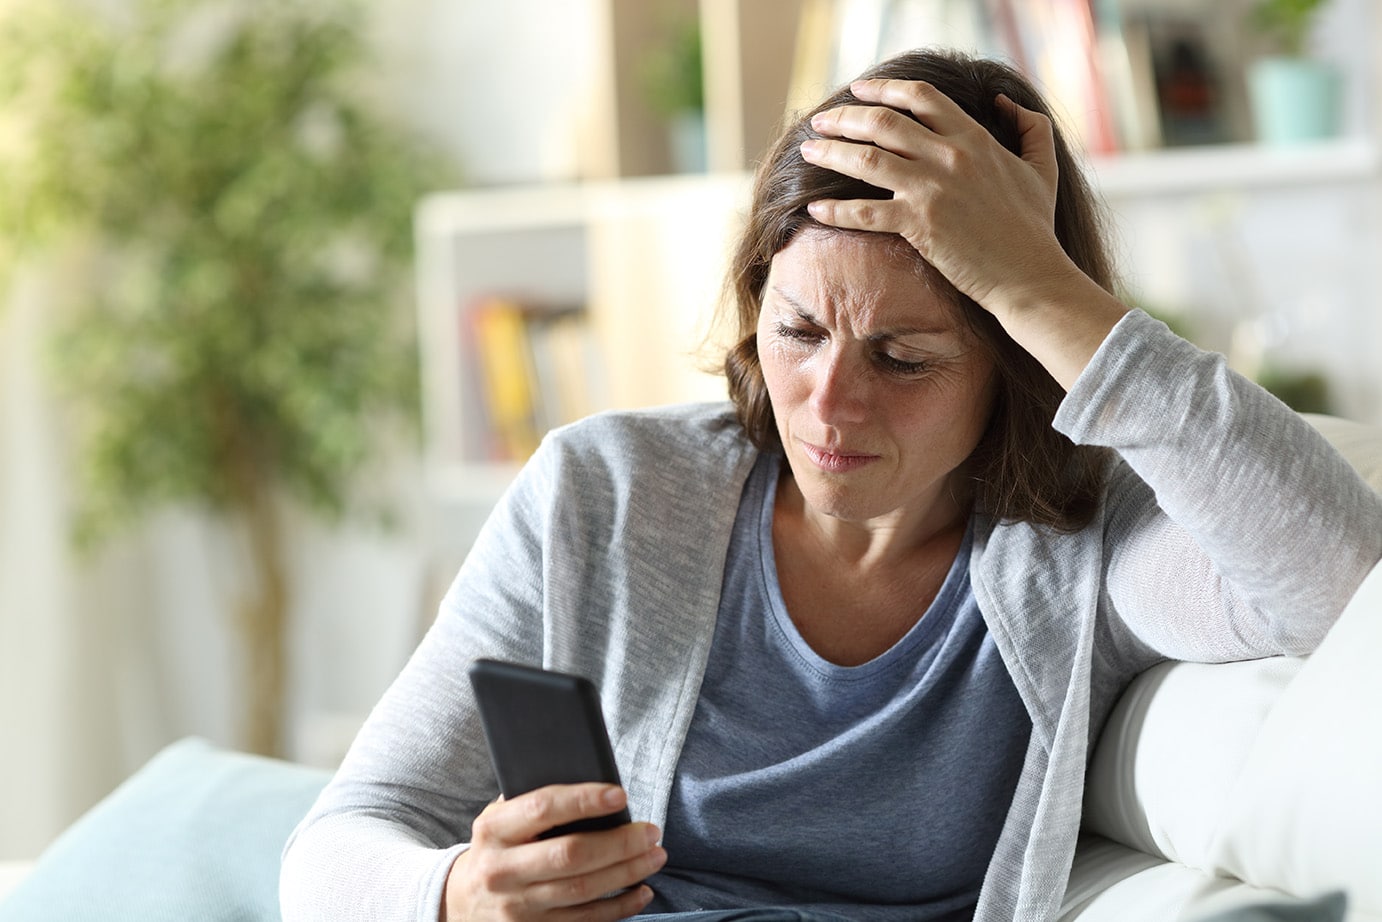 Concerned Woman Looking at Phone